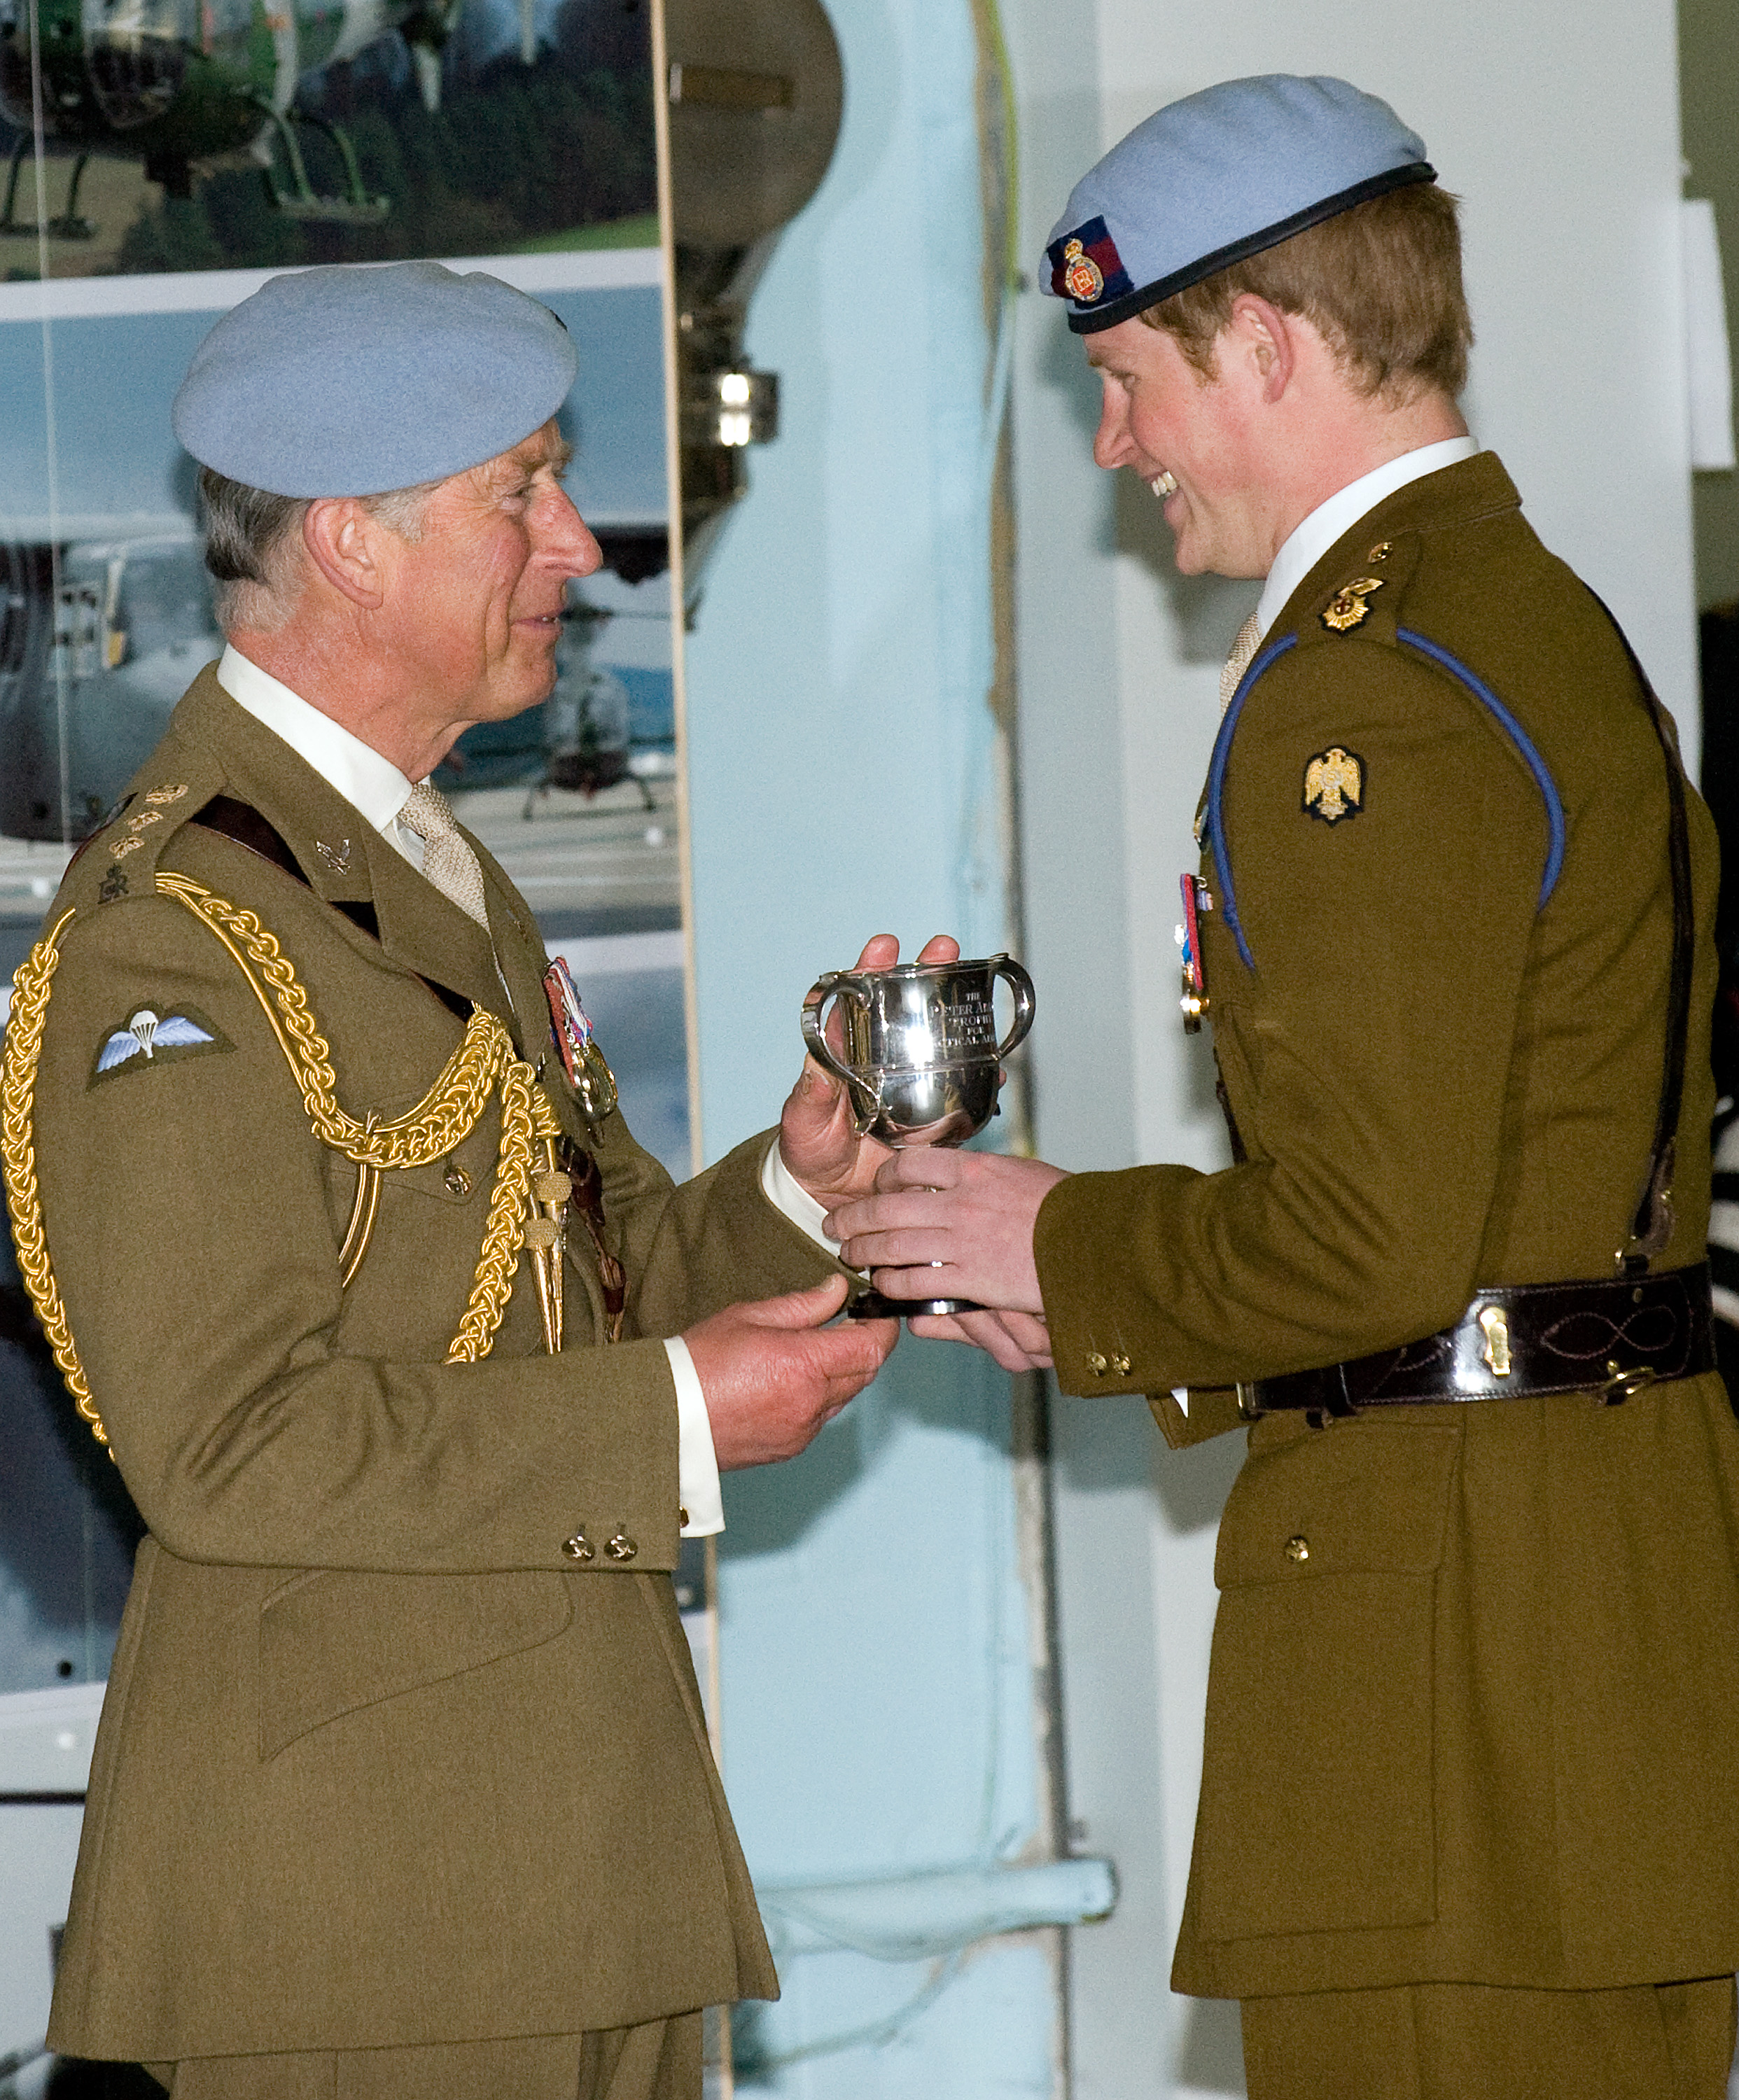 Prince Charles, Prince of Wales presents Prince Harry with his flying badges at the Museum of Army Flying in Middle Wallup, England on May 7, 2010. | Source: Getty Images